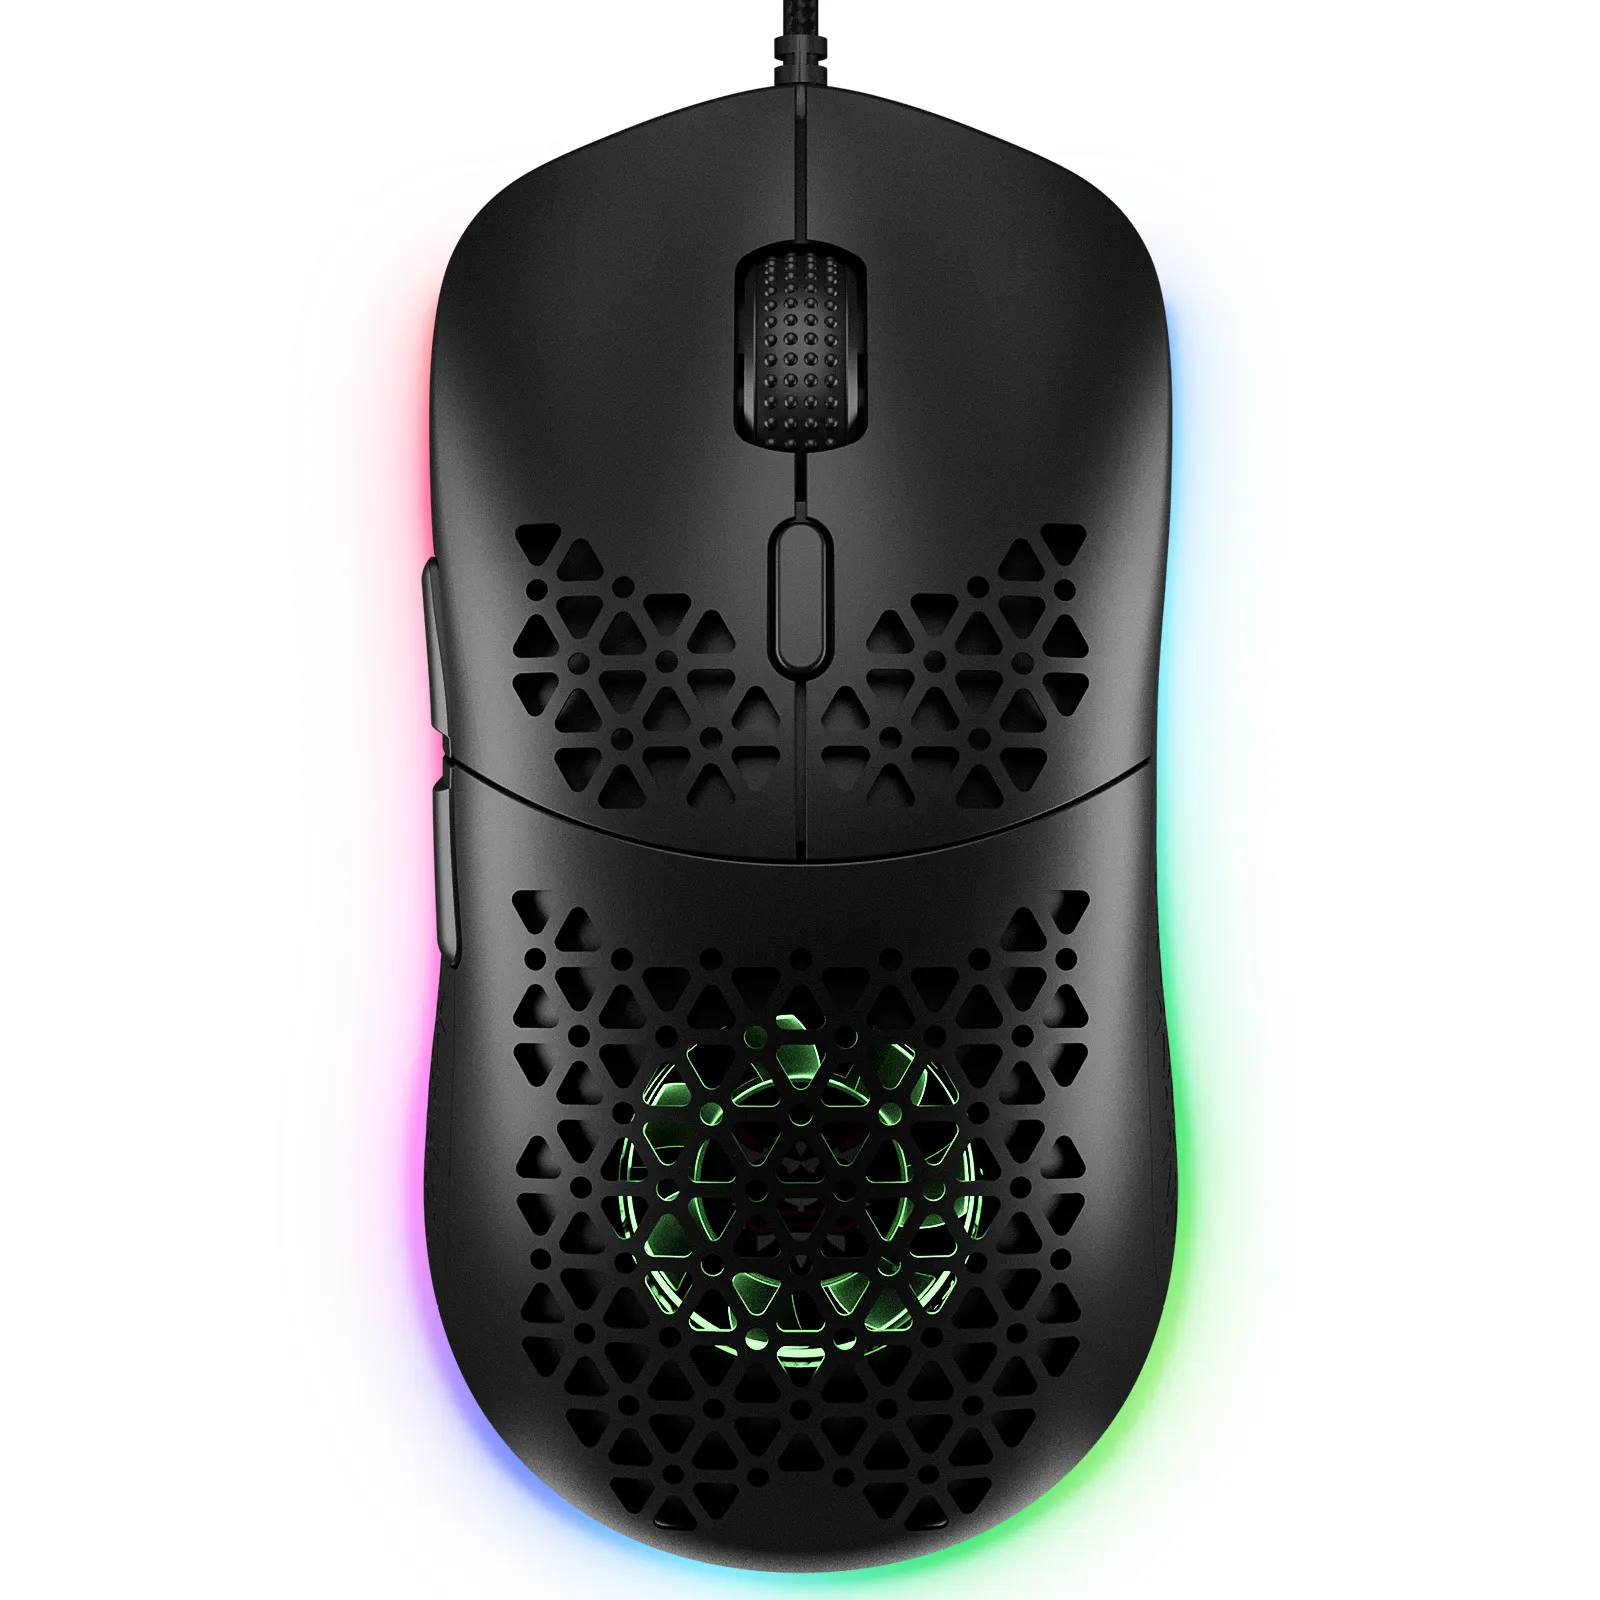 Overseas warehouse Onikuma CW911 Ultra light Honeycomb wired RGB Gaming Mouse usb computer gaming mouse pc 7200dpi optical mice